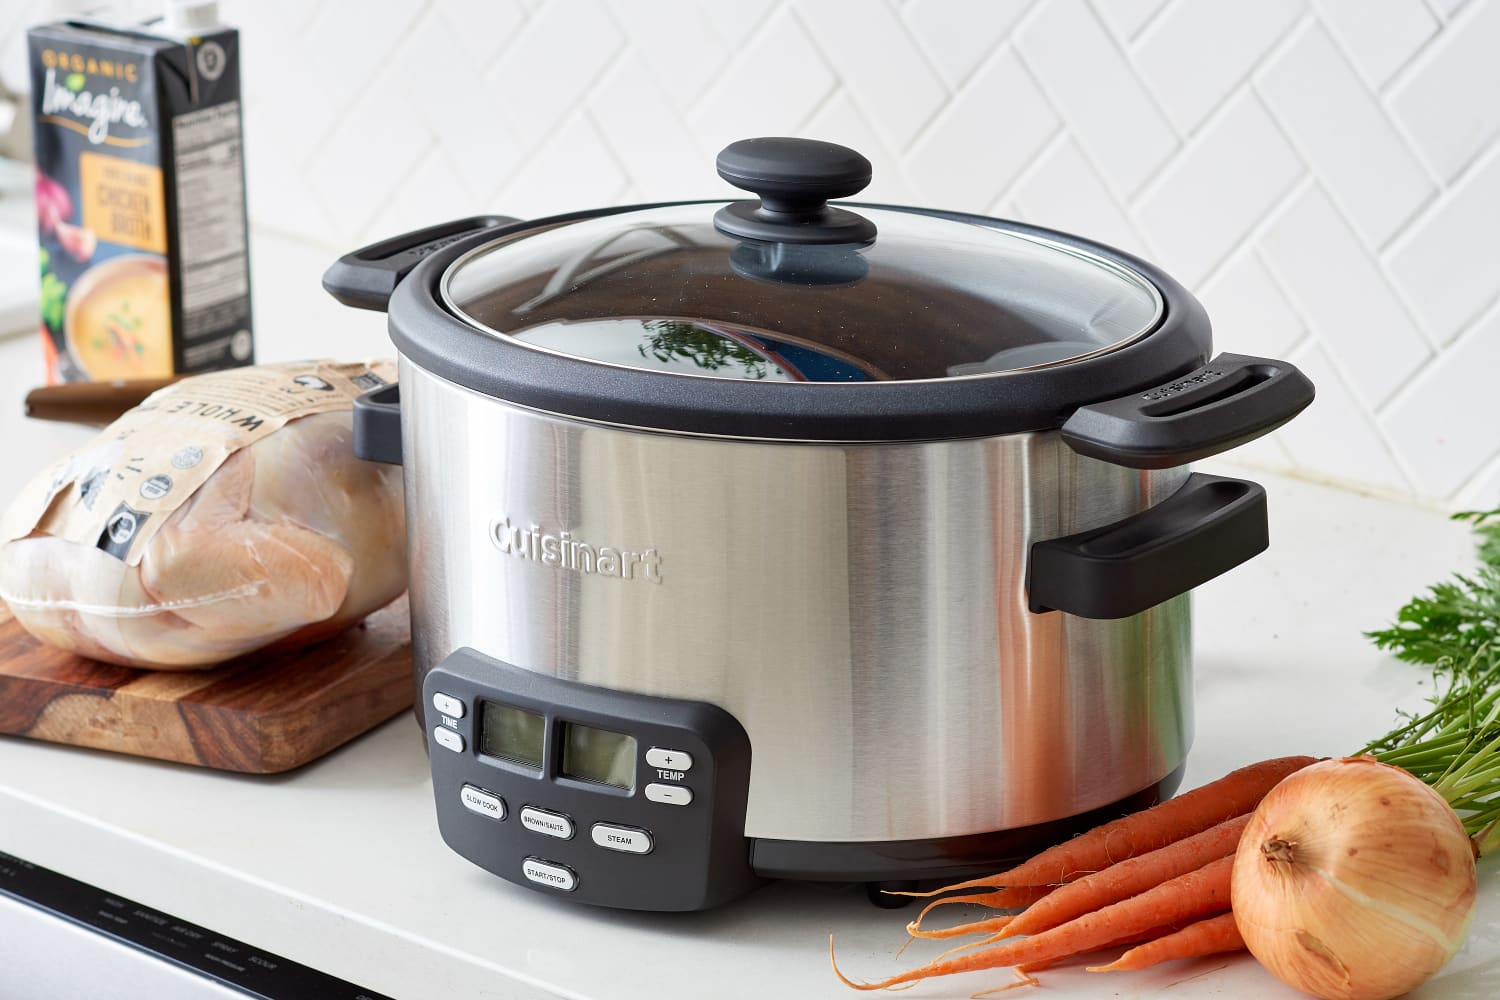 The Reynolds Slow Cooker Liners Make Cleanup a Breeze